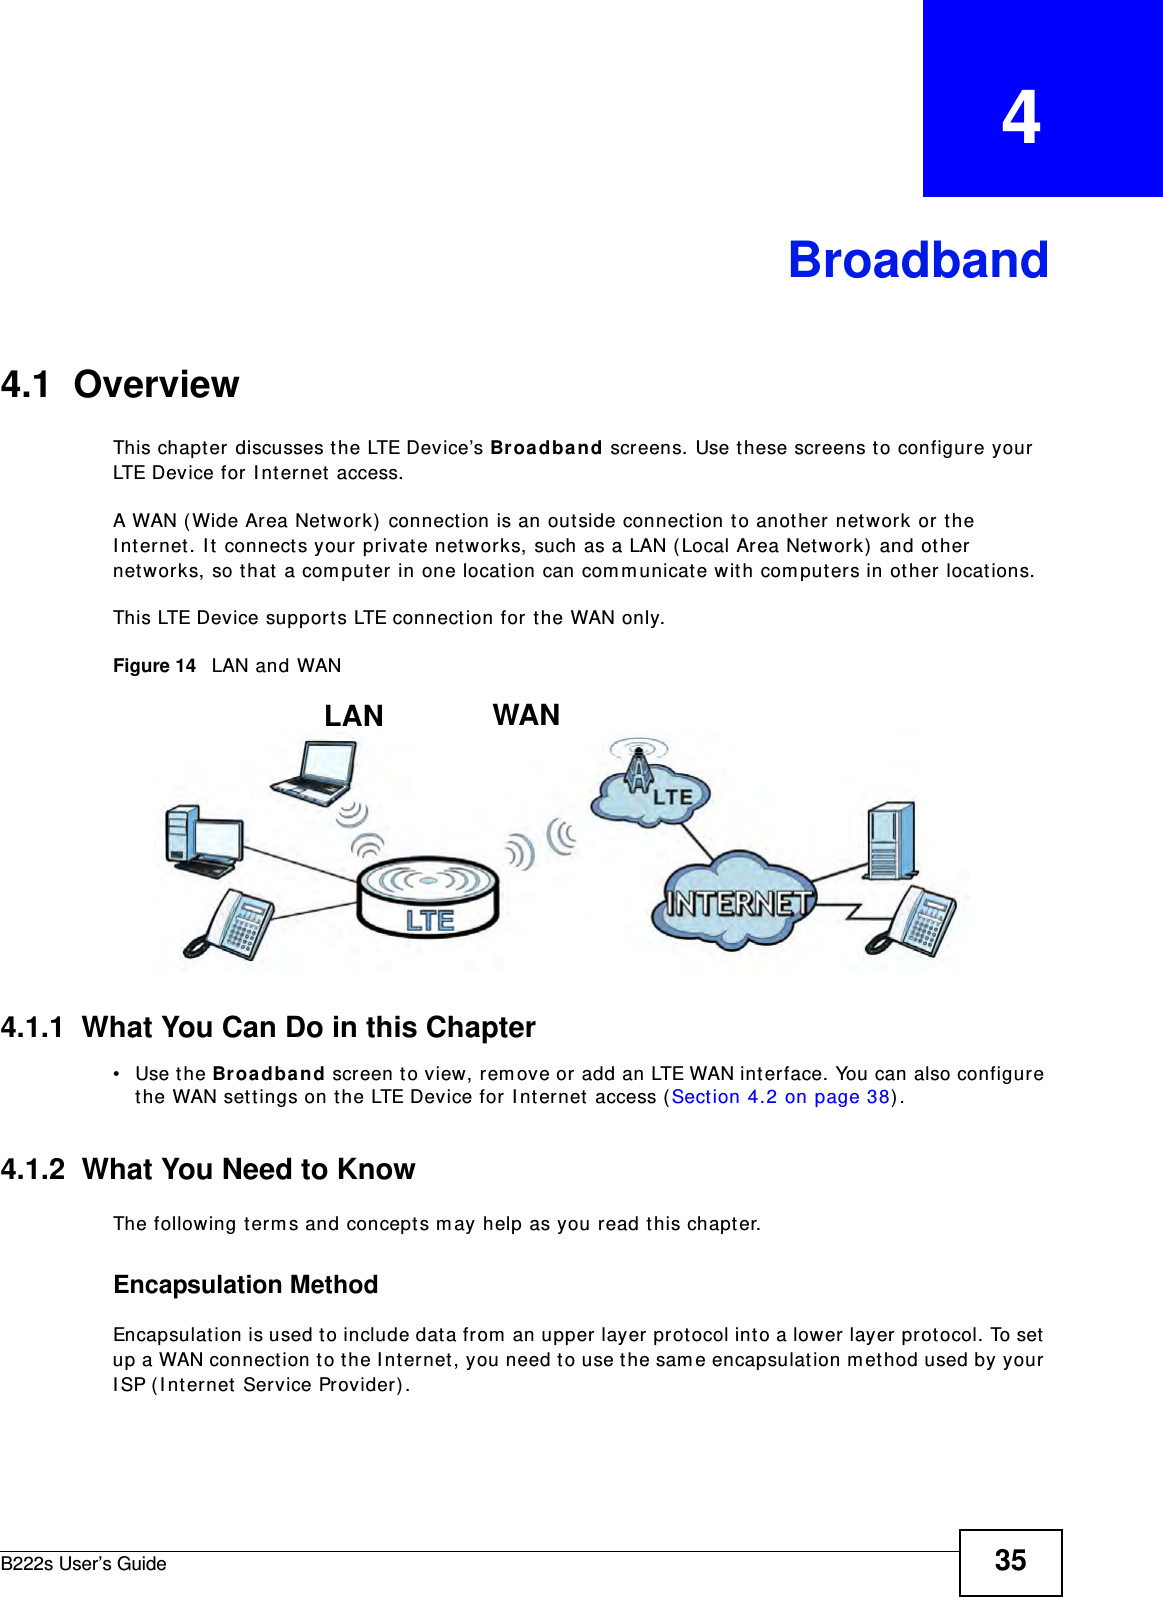 B222s User’s Guide 35CHAPTER   4Broadband4.1  OverviewThis chapt er  discusses t he LTE Device’s Broa dband screens. Use t hese screens t o configure your LTE Device for I nt ernet  access.A WAN ( Wide Ar ea Networ k)  connect ion is an out side connection to anot her net work or t he I nt ernet. I t connect s your private networks, such as a LAN ( Local Area Network)  and ot her networks, so t hat  a com puter in one location can com m unicat e wit h com put ers in other locat ions.This LTE Device support s LTE connection for t he WAN only.Figure 14   LAN and WAN4.1.1  What You Can Do in this Chapter• Use the Broa dband screen t o view, rem ove or add an LTE WAN int erface. You can also configure the WAN sett ings on t he LTE Device for I nternet  access ( Sect ion 4.2 on page 38) .4.1.2  What You Need to KnowThe following term s and concept s m ay help as you read this chapt er.Encapsulation MethodEncapsulation is used t o include dat a from  an upper layer prot ocol into a lower layer prot ocol. To set  up a WAN connection t o t he I nt ernet, you need to use t he sam e encapsulat ion m et hod used by your I SP ( I nternet Service Provider) .WANLAN